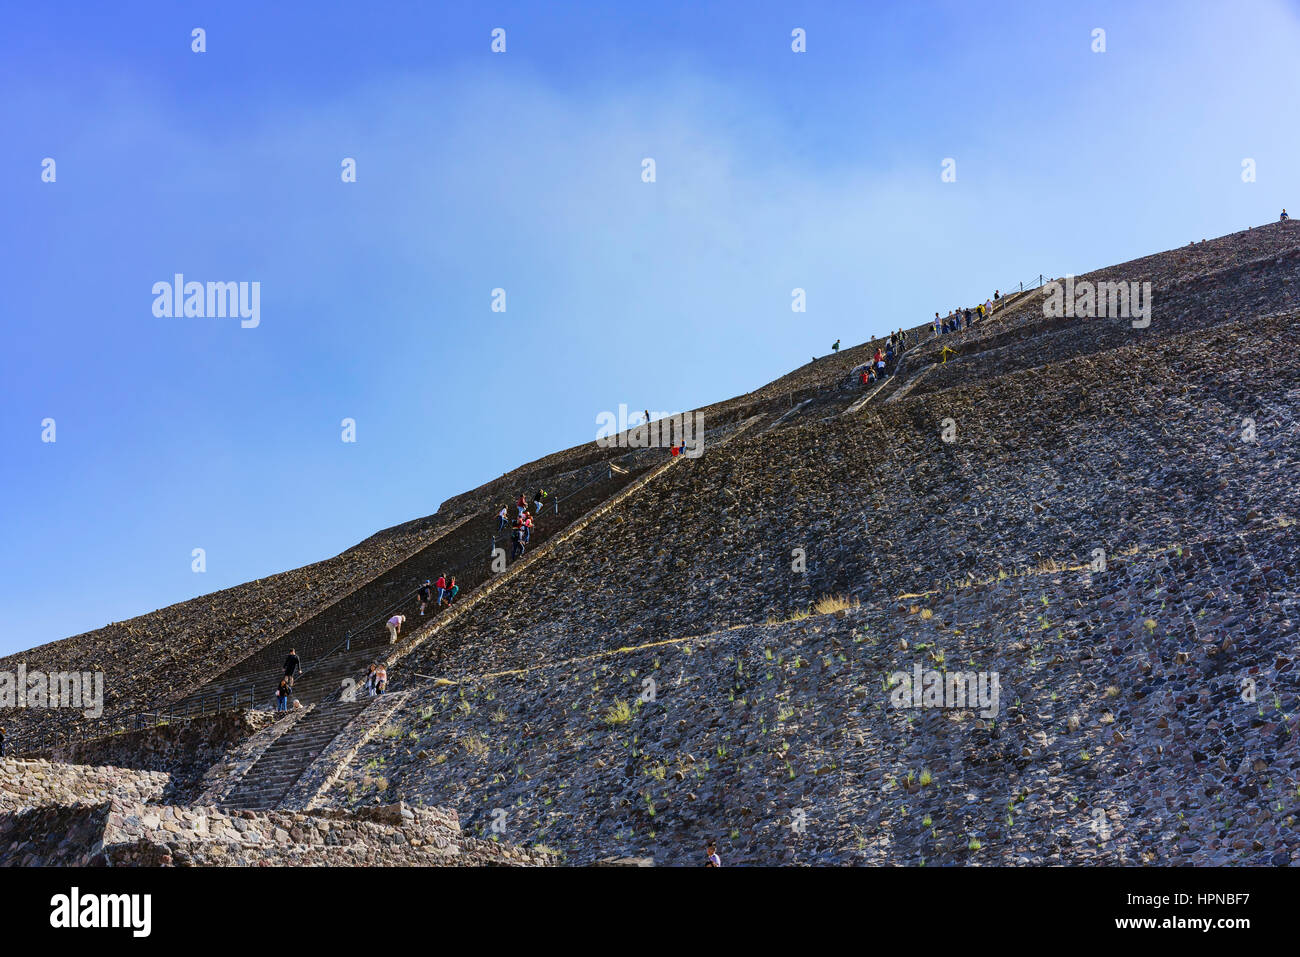 The famous and historical Pyramid of the Sun in Teotihuacan, Mexico Stock Photo